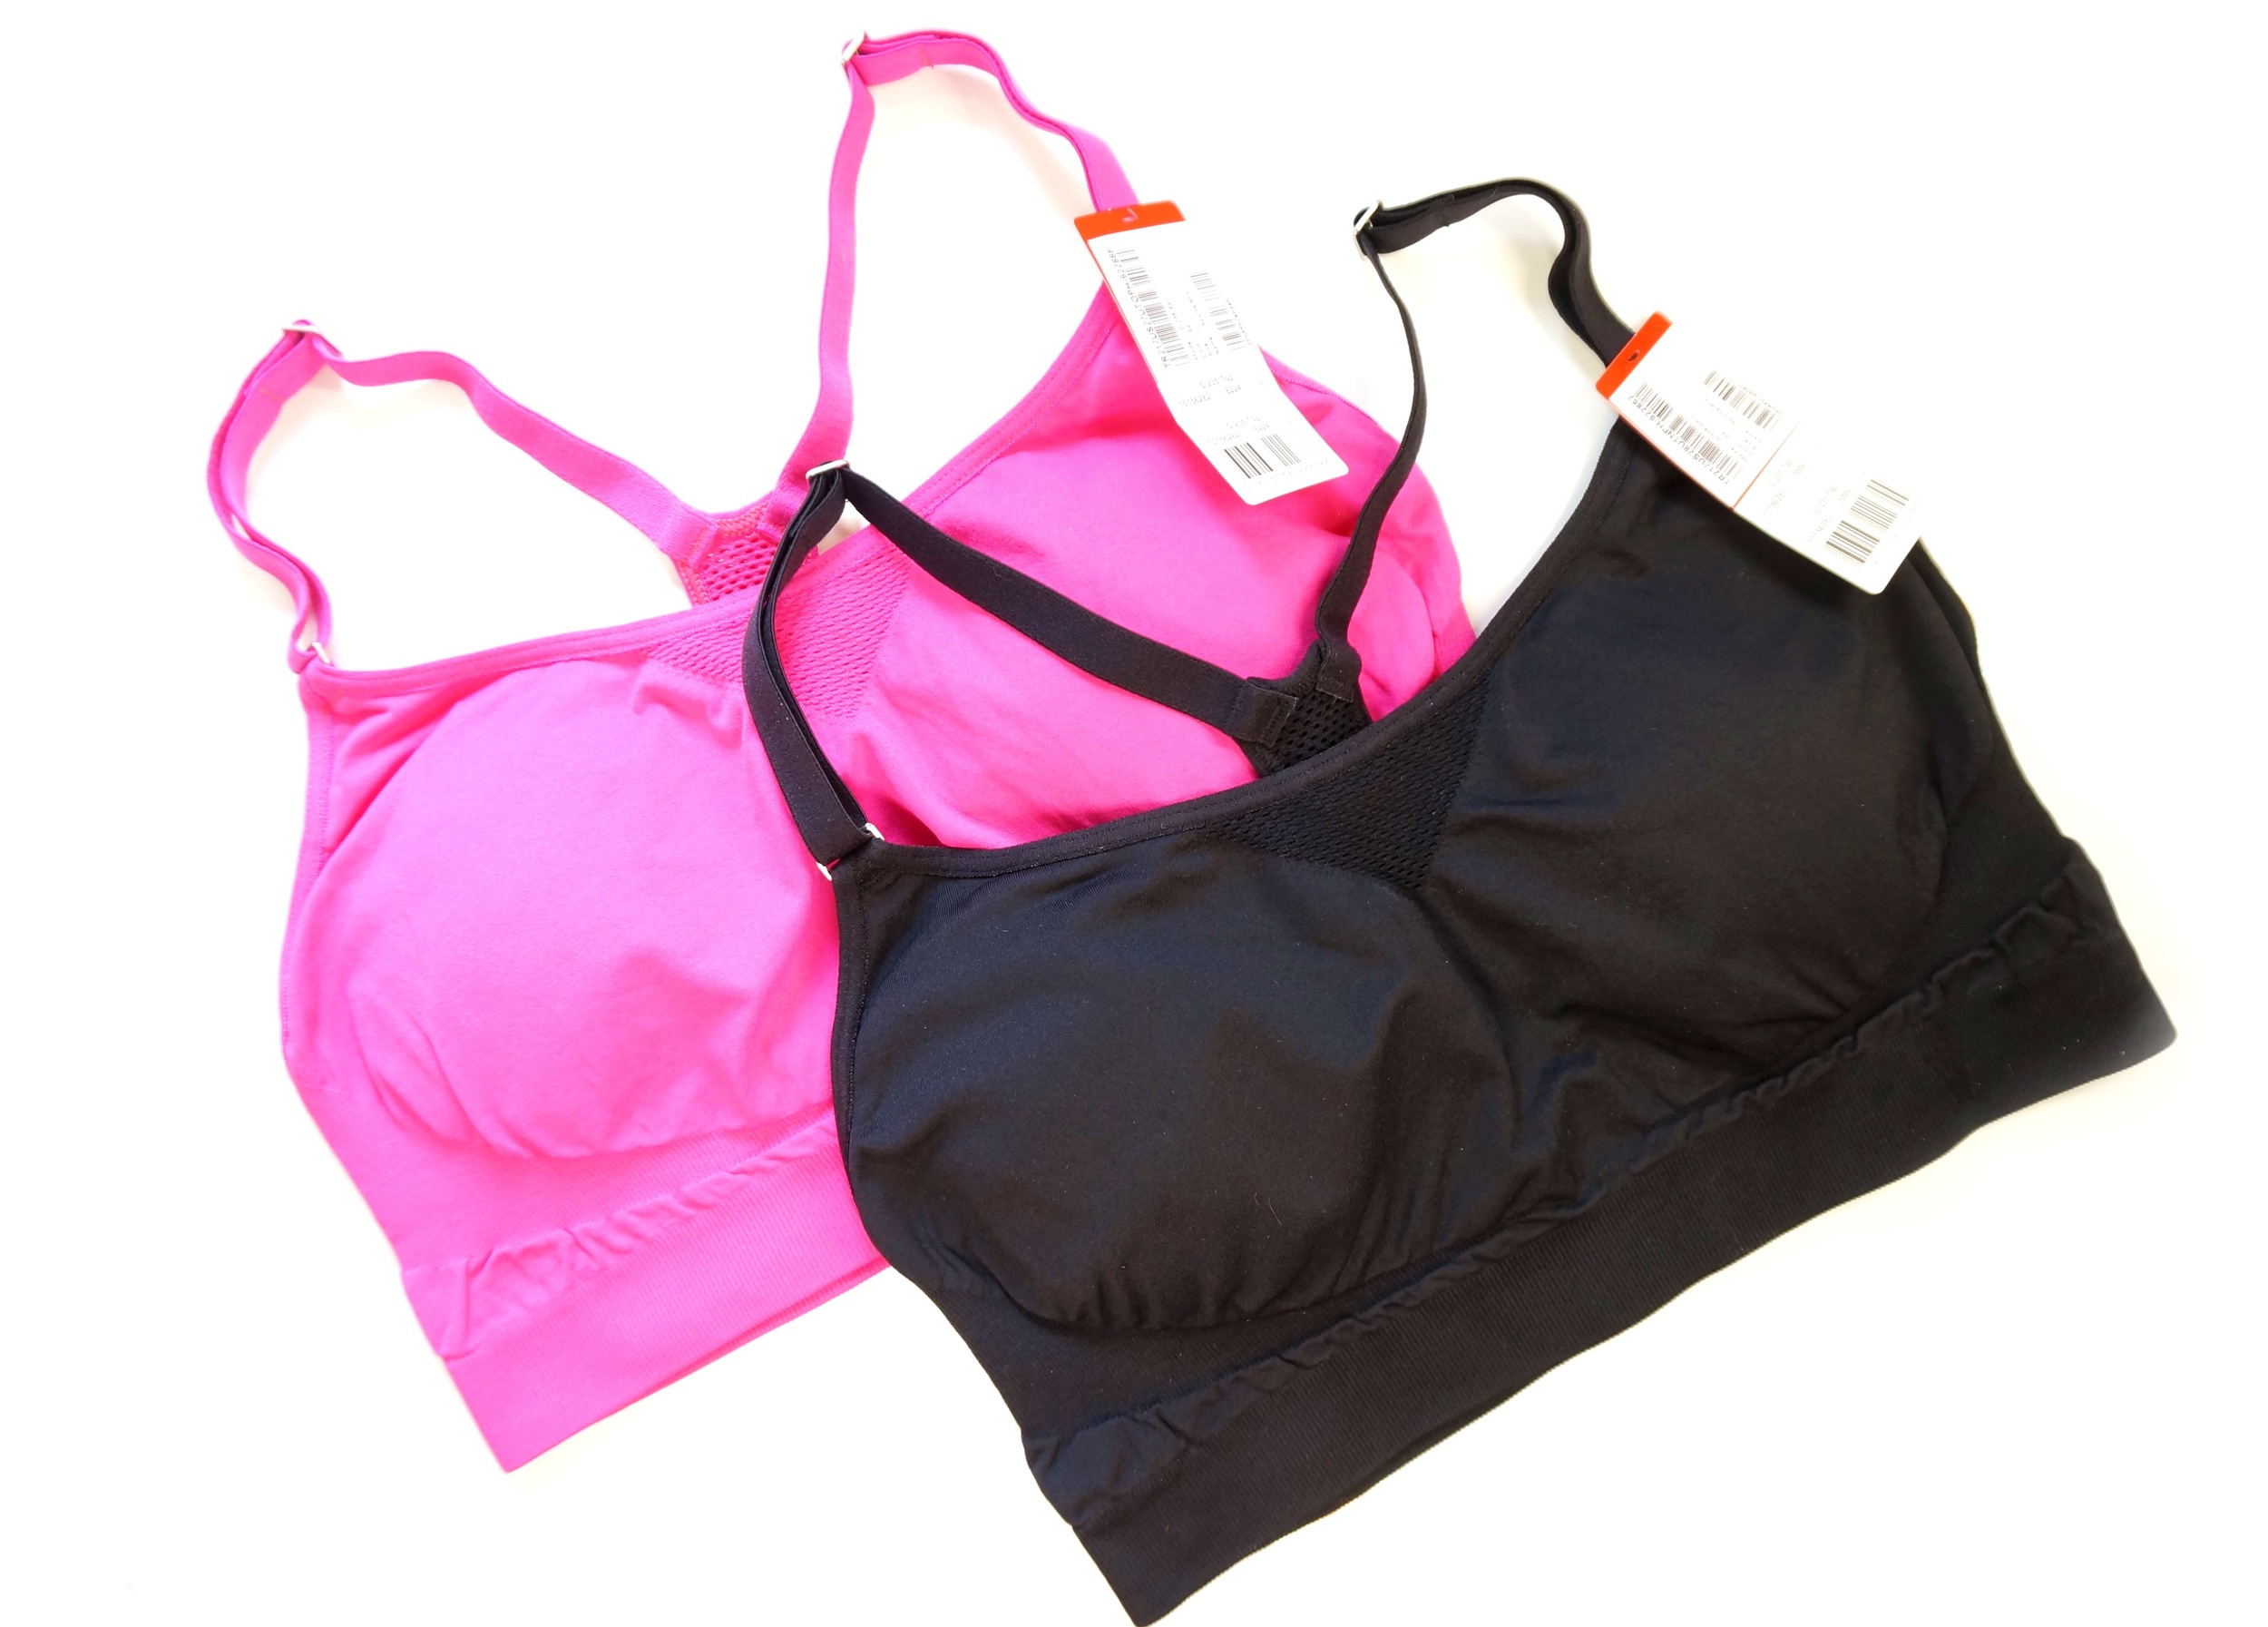 For your boobs only: The Triumph Sports Bra and NuBra Seamless